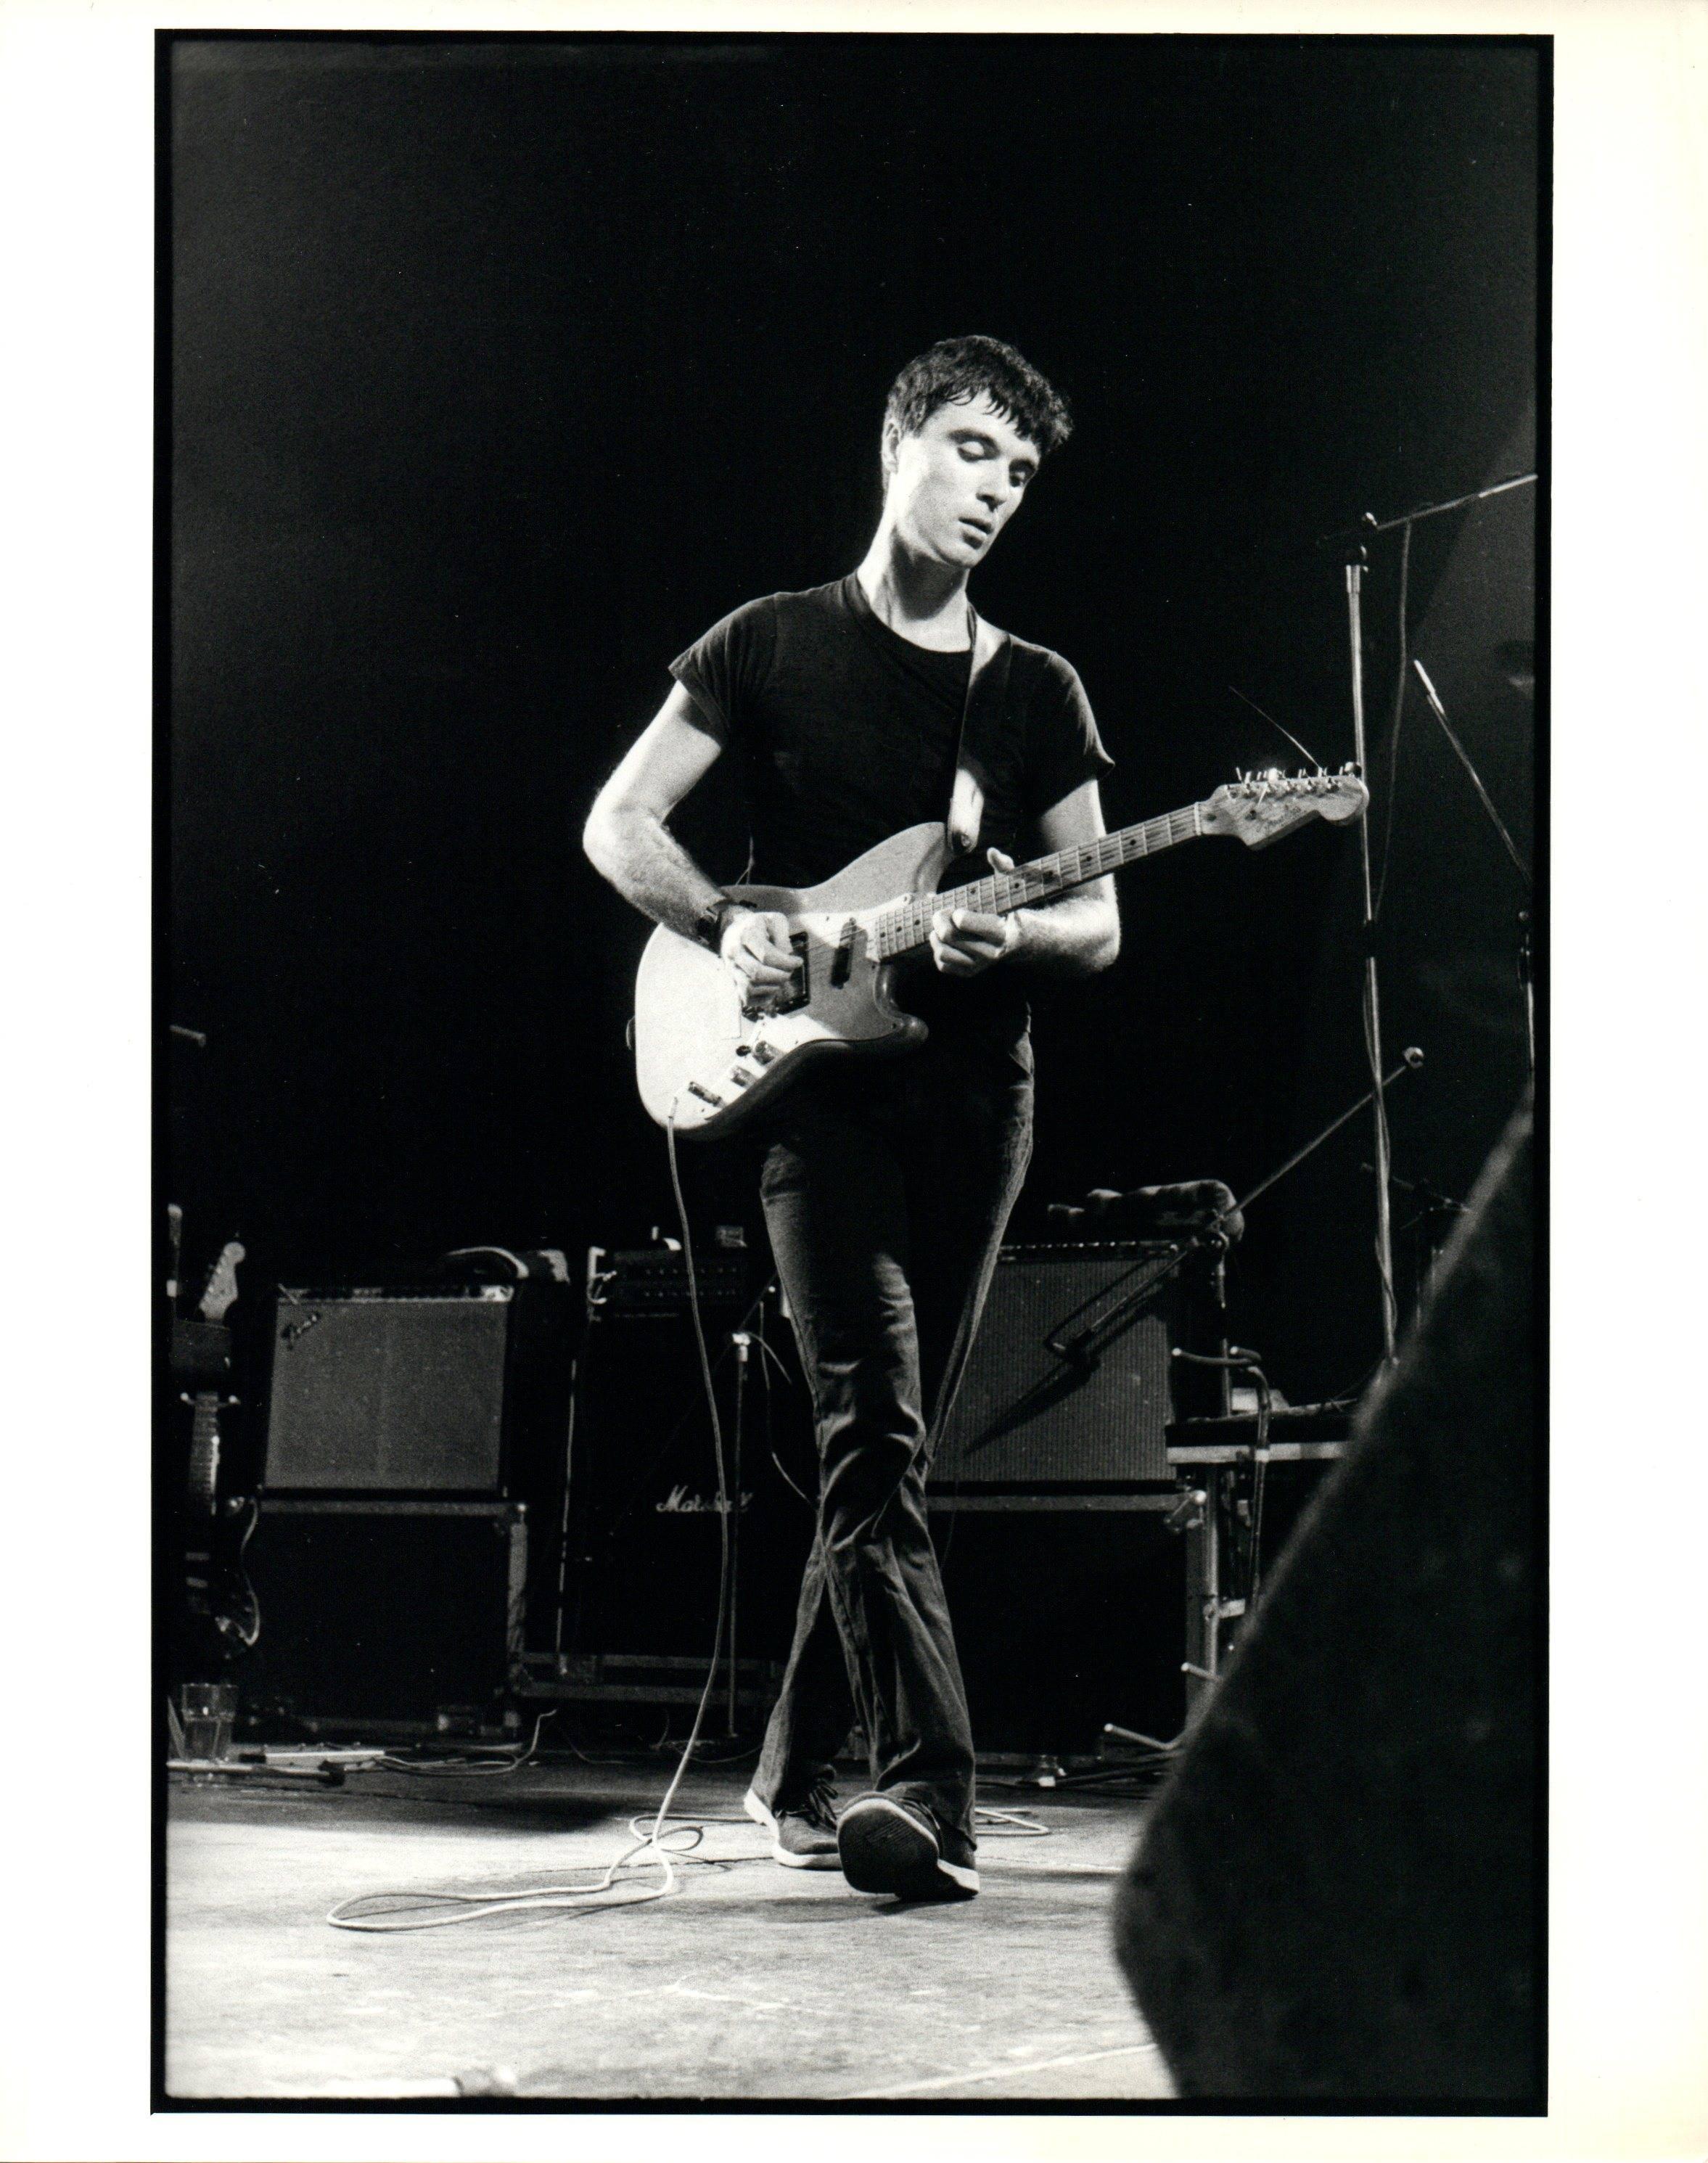 Paul Cox Black and White Photograph - David Byrne of Talking Heads on Stage Vintage Original Photograph